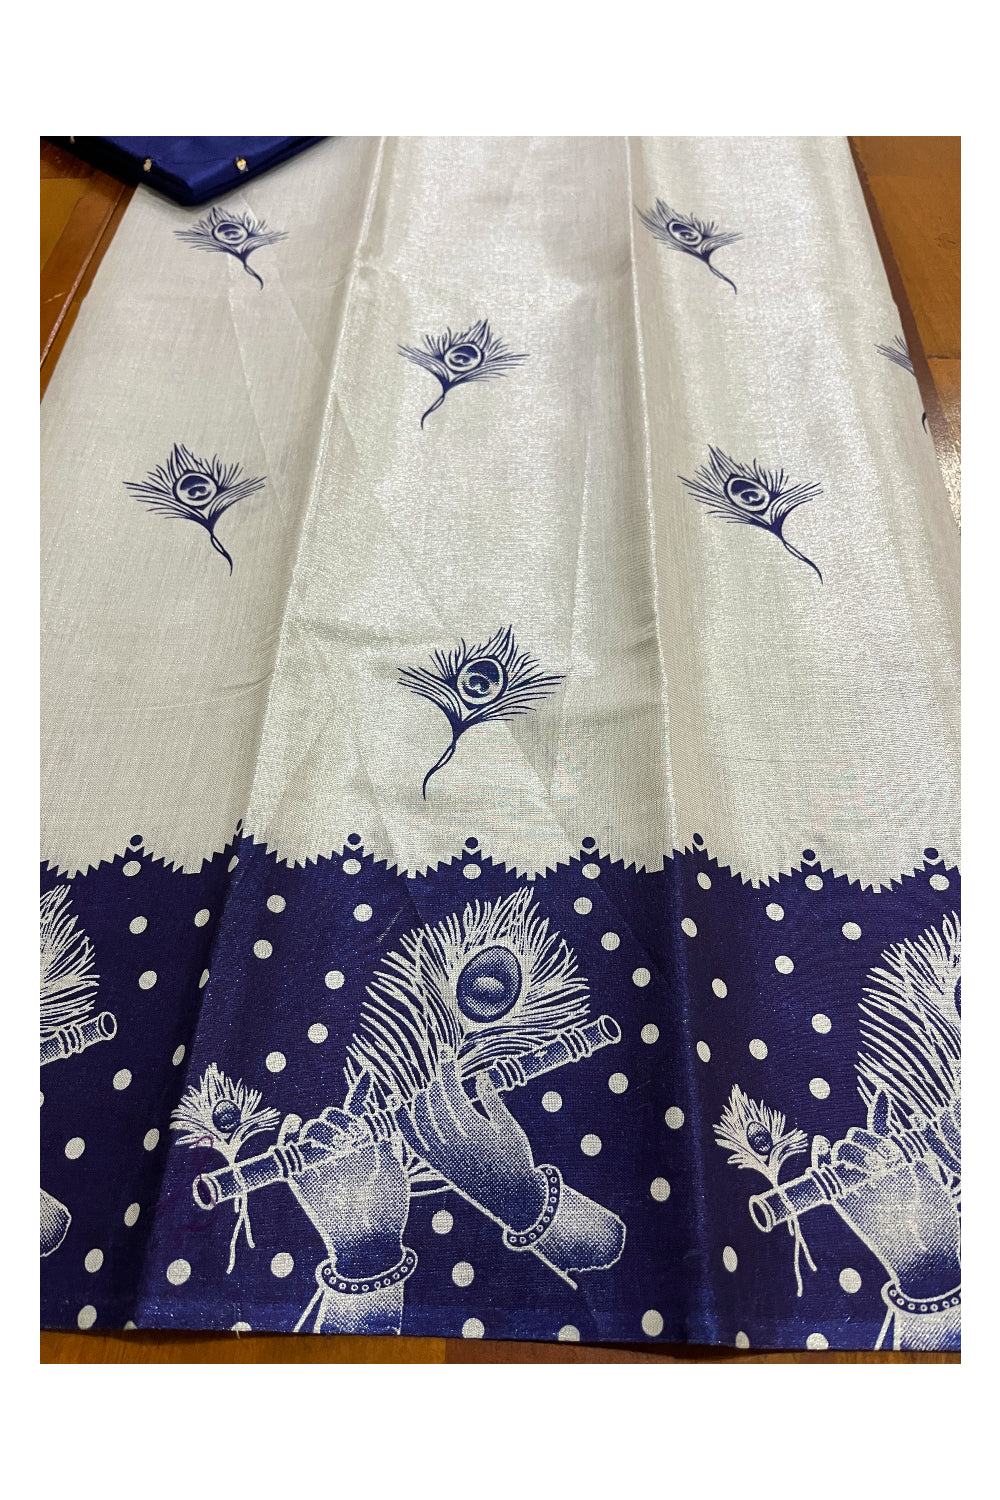 Kerala Silver Tissue Block Printed Pavada and Blue Blouse Material for Kids 3 Meters